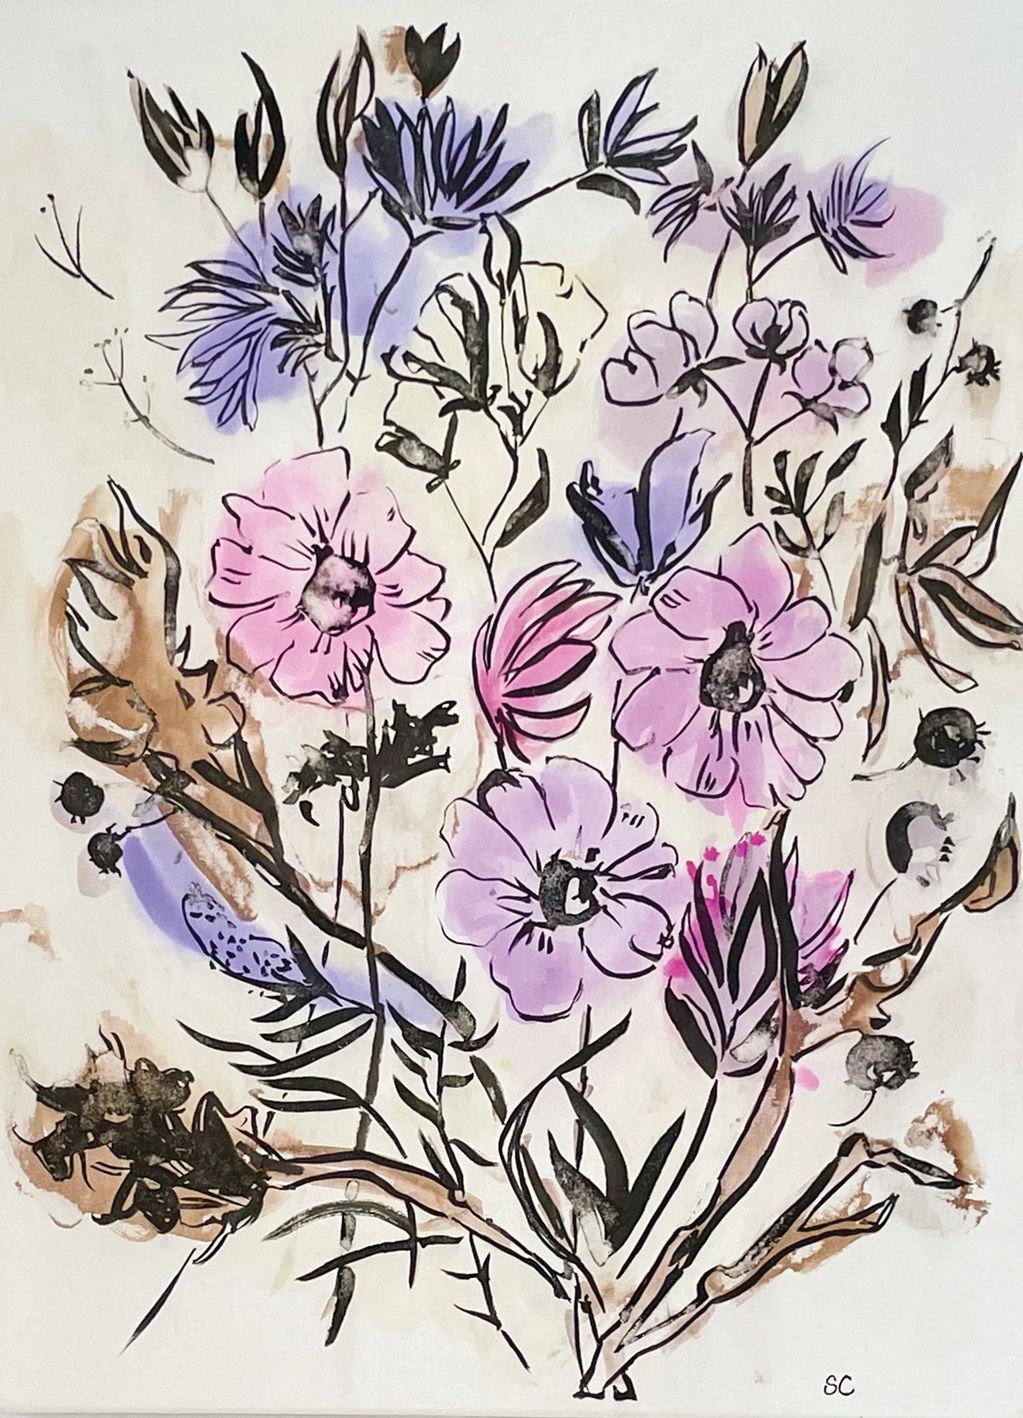 Poppy, Buddelia, Oak, Sweet Gum with Ink
watercolor, graphite and ink on canvas
18" x 24"
Contact fo